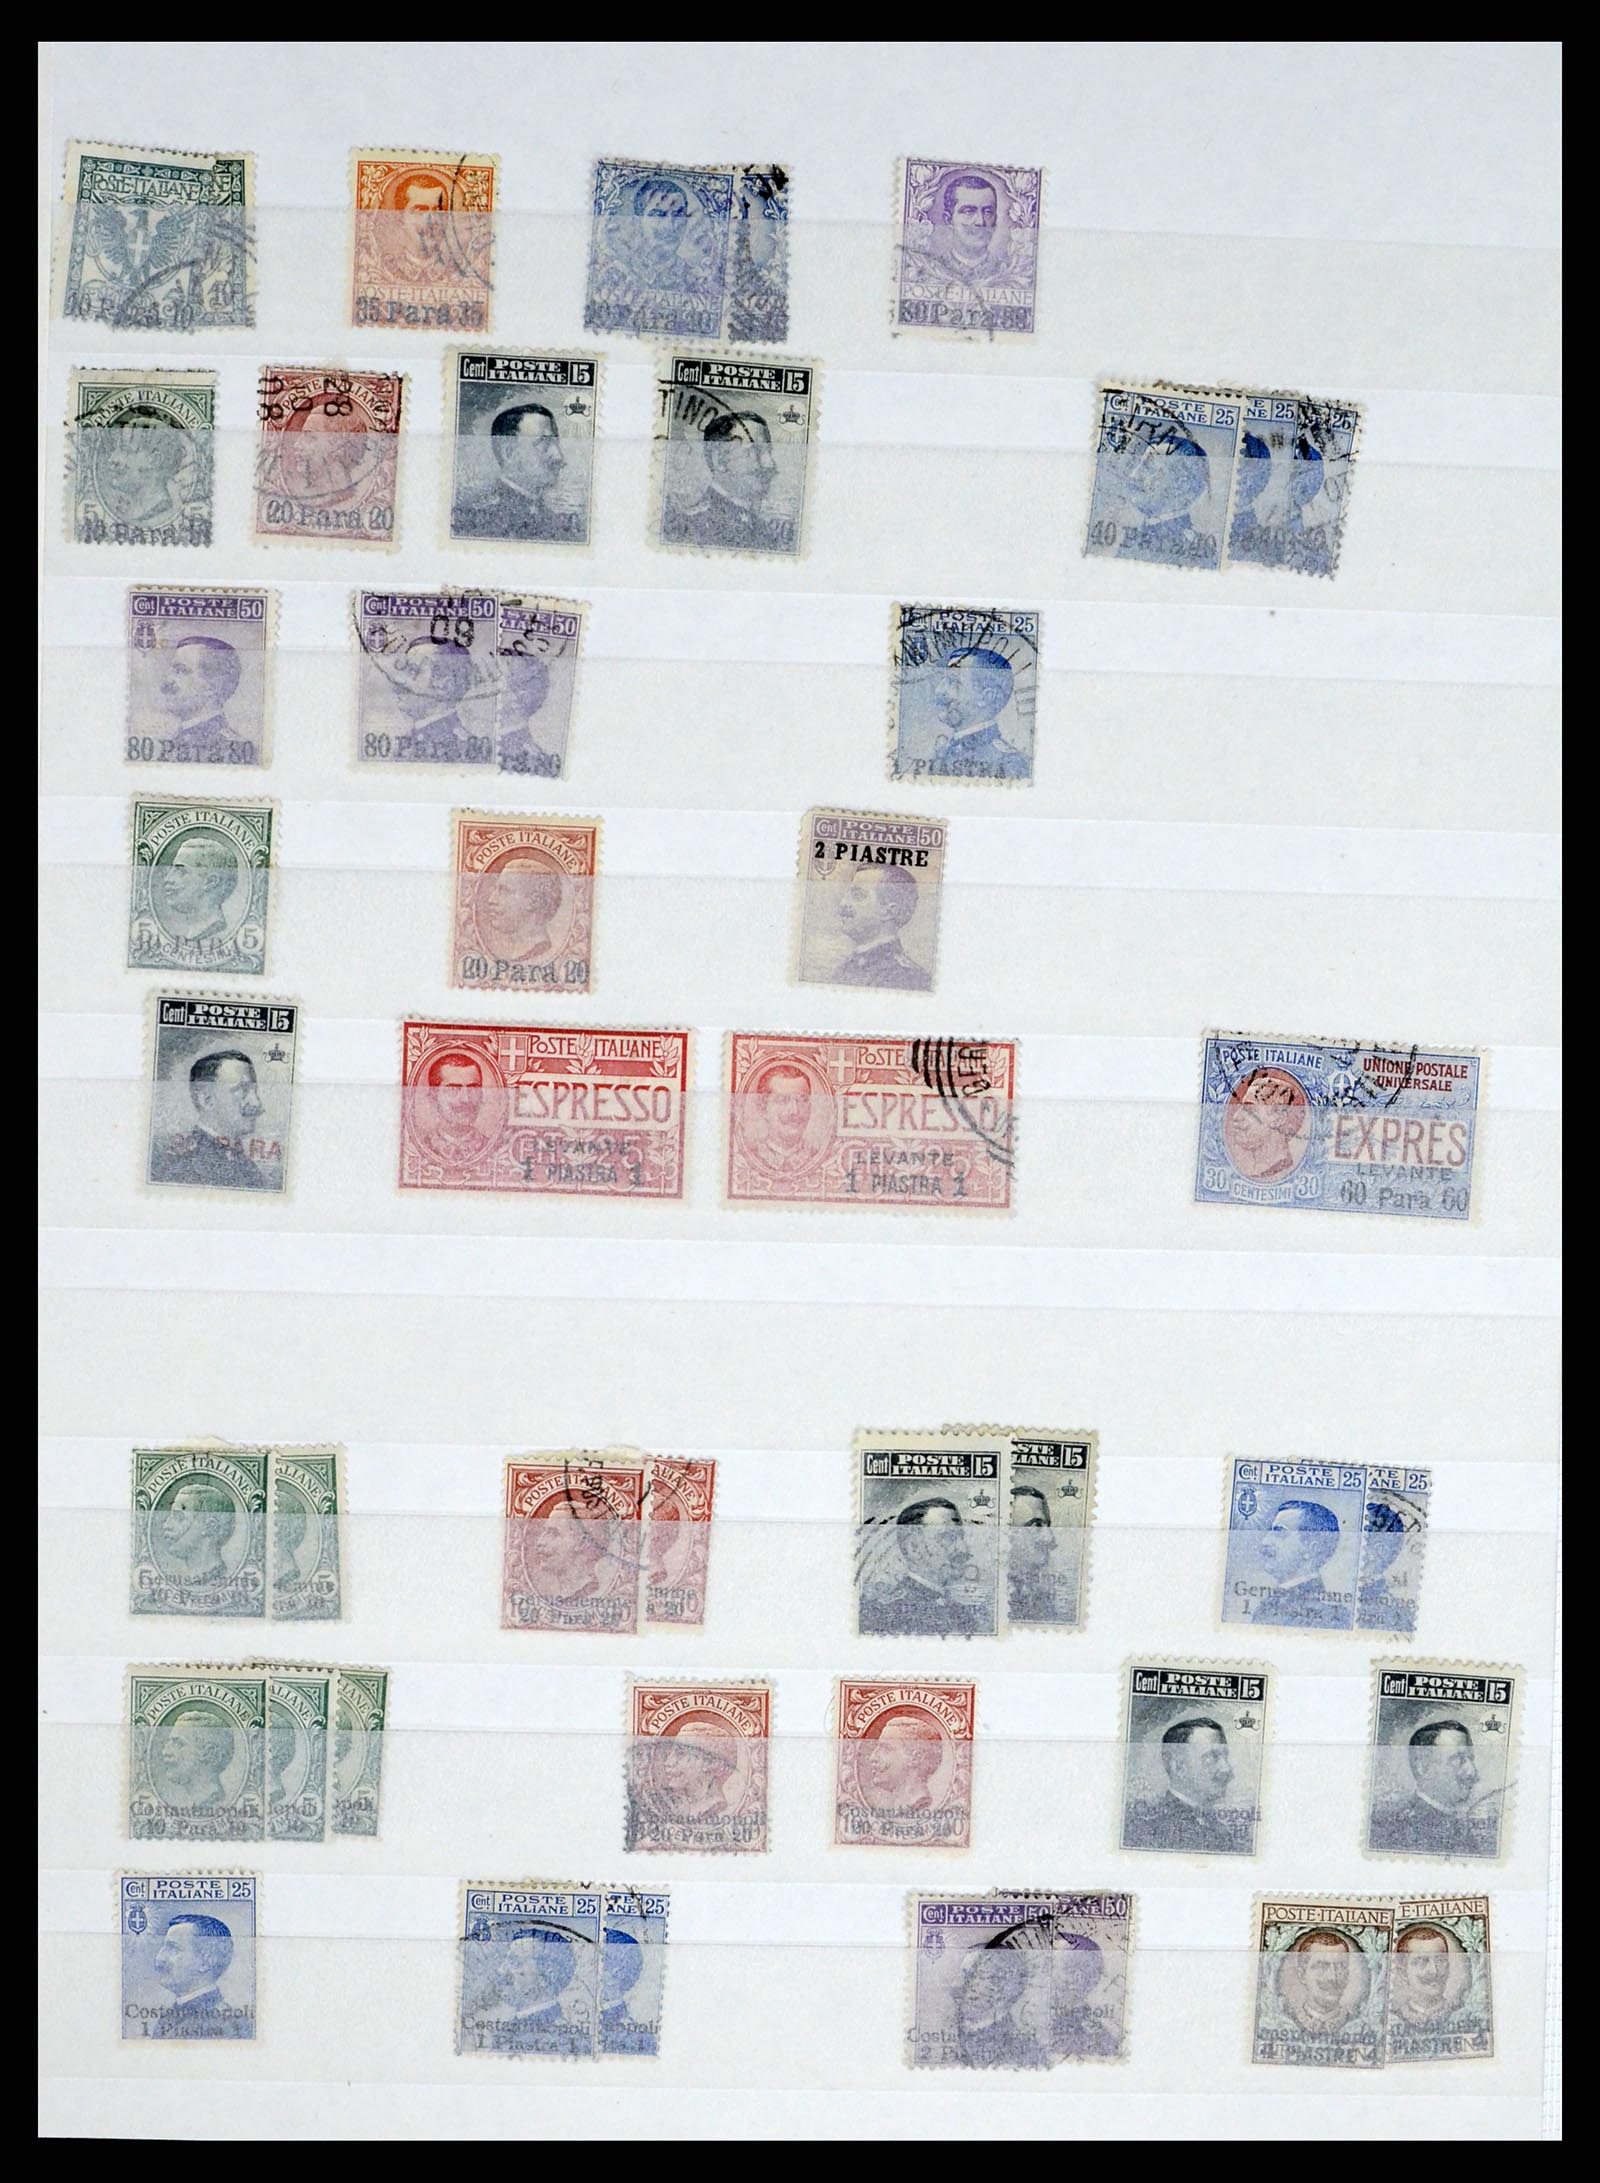 37277 010 - Stamp collection 37277 Italian Levant and territories 1874-1919.